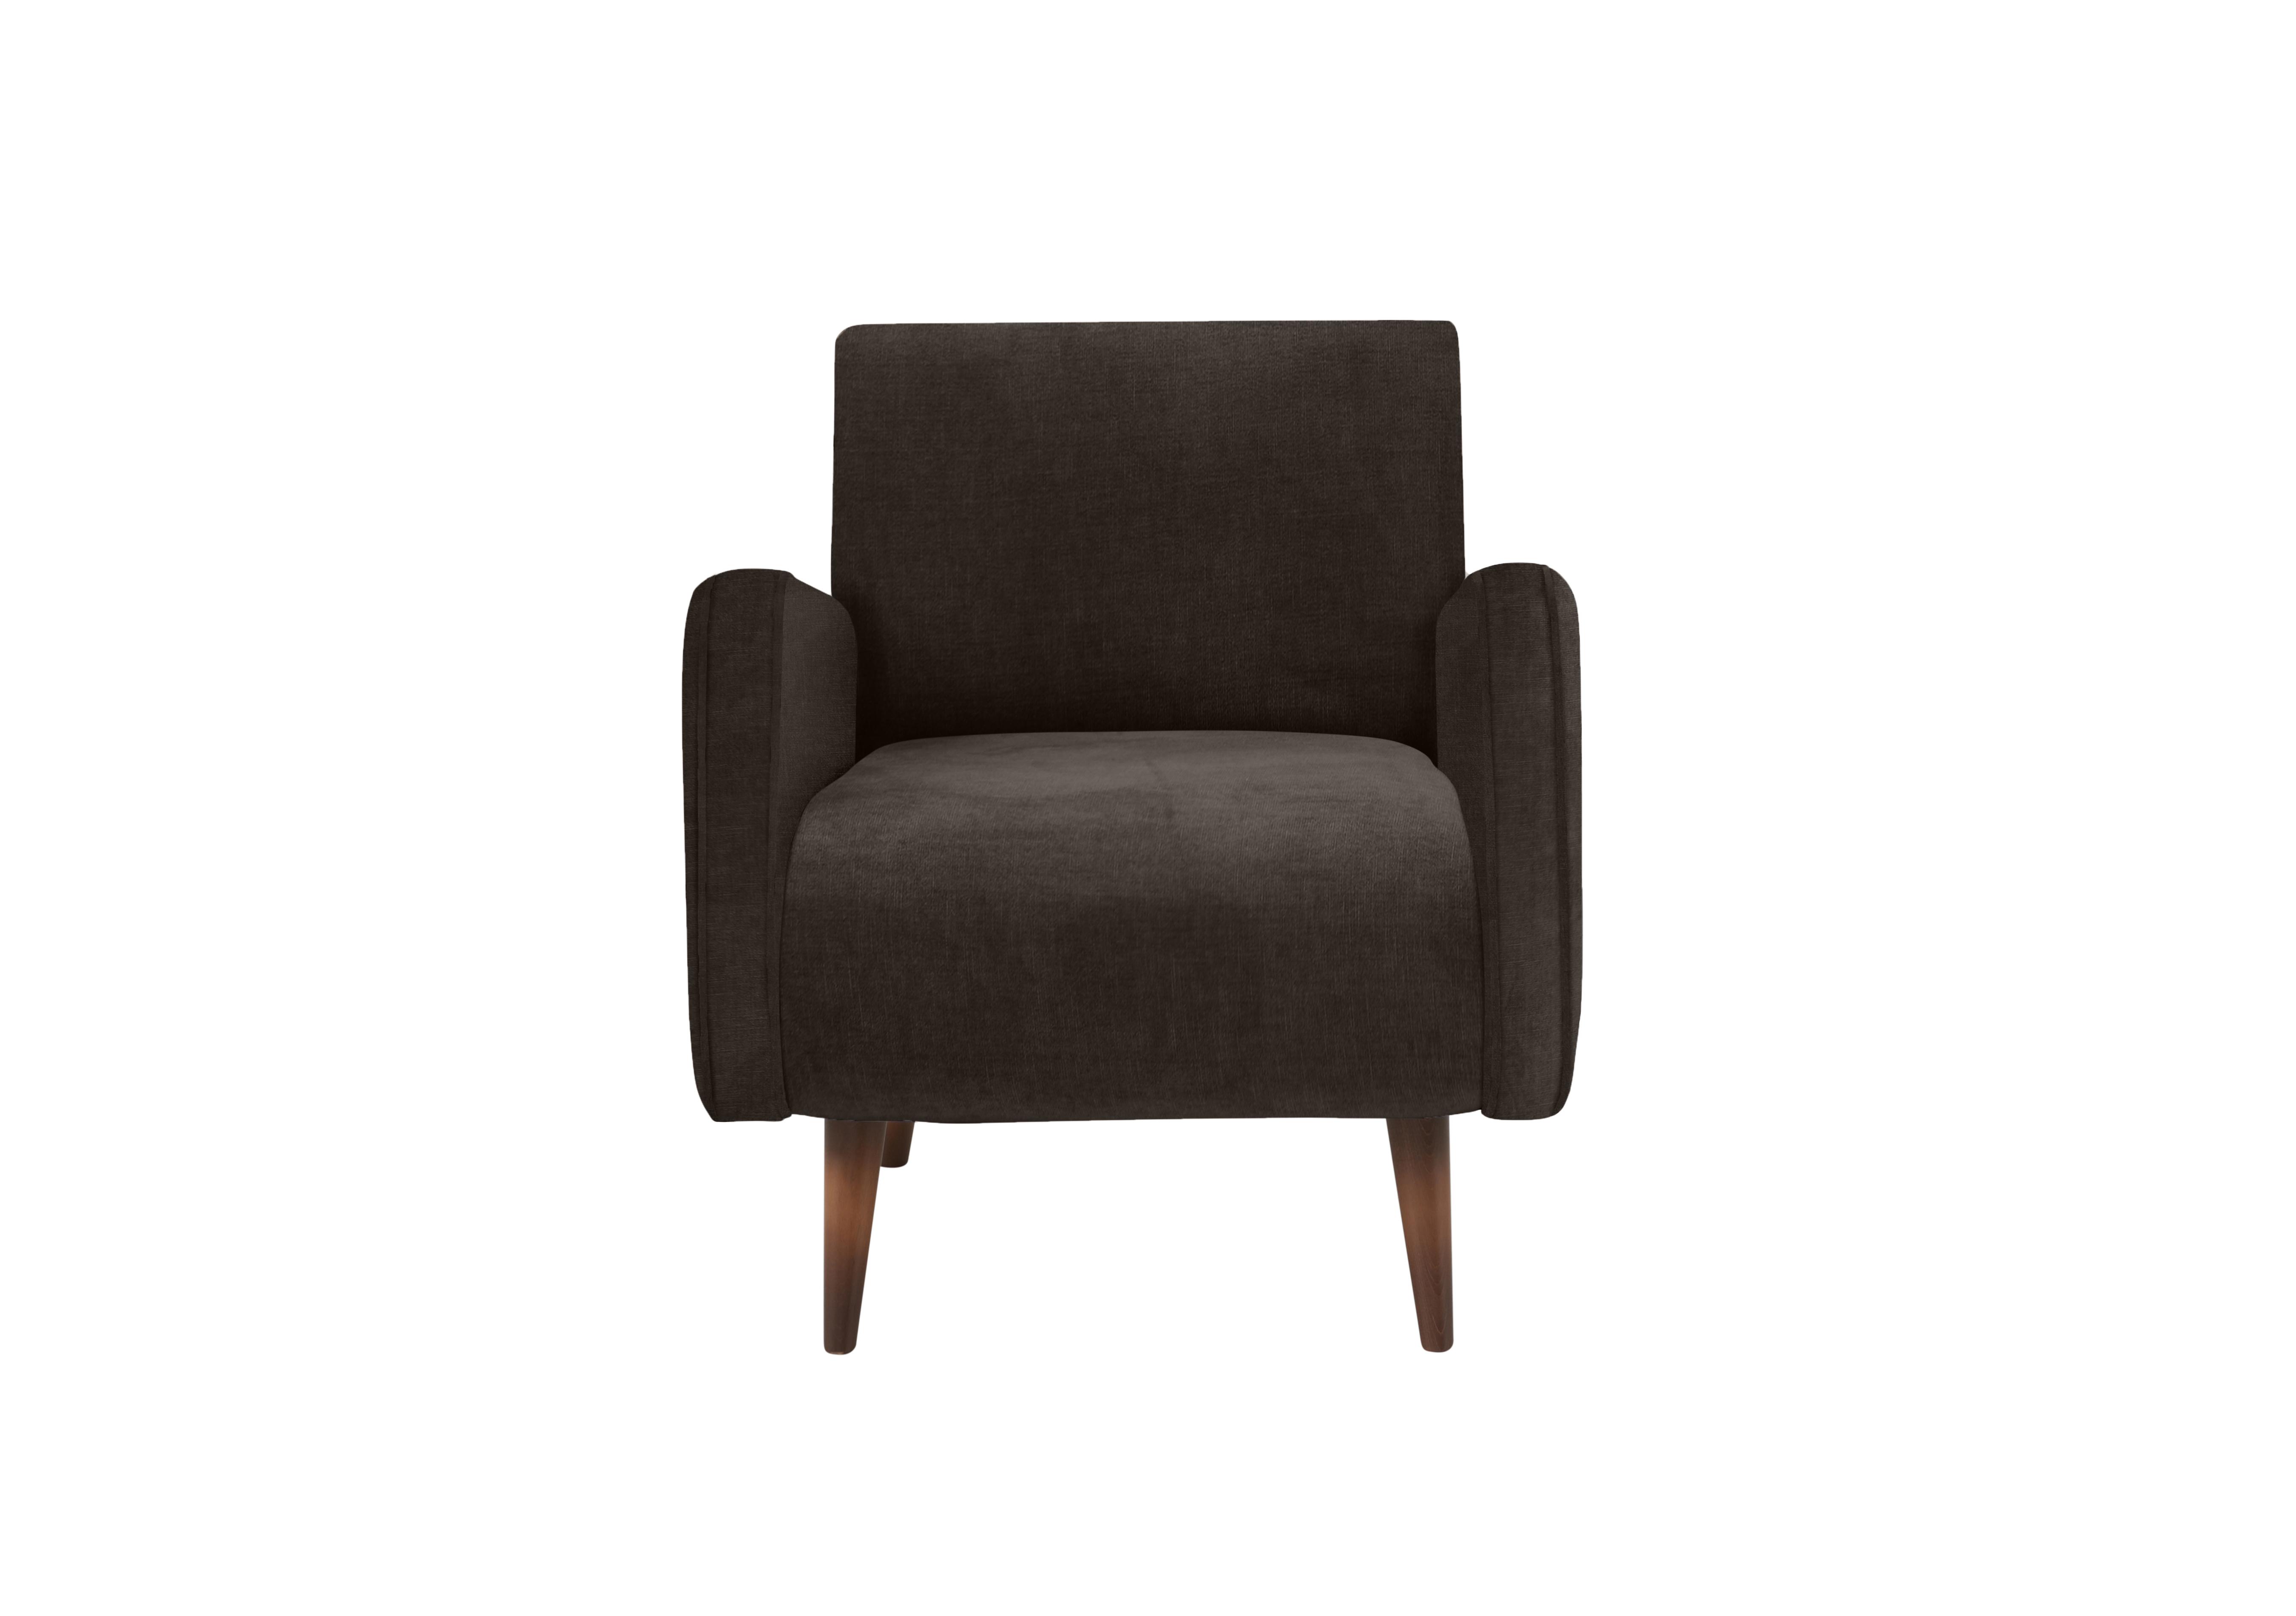 Sumptuous Fabric Accent Chair in Chamonix Mocha Dk on Furniture Village